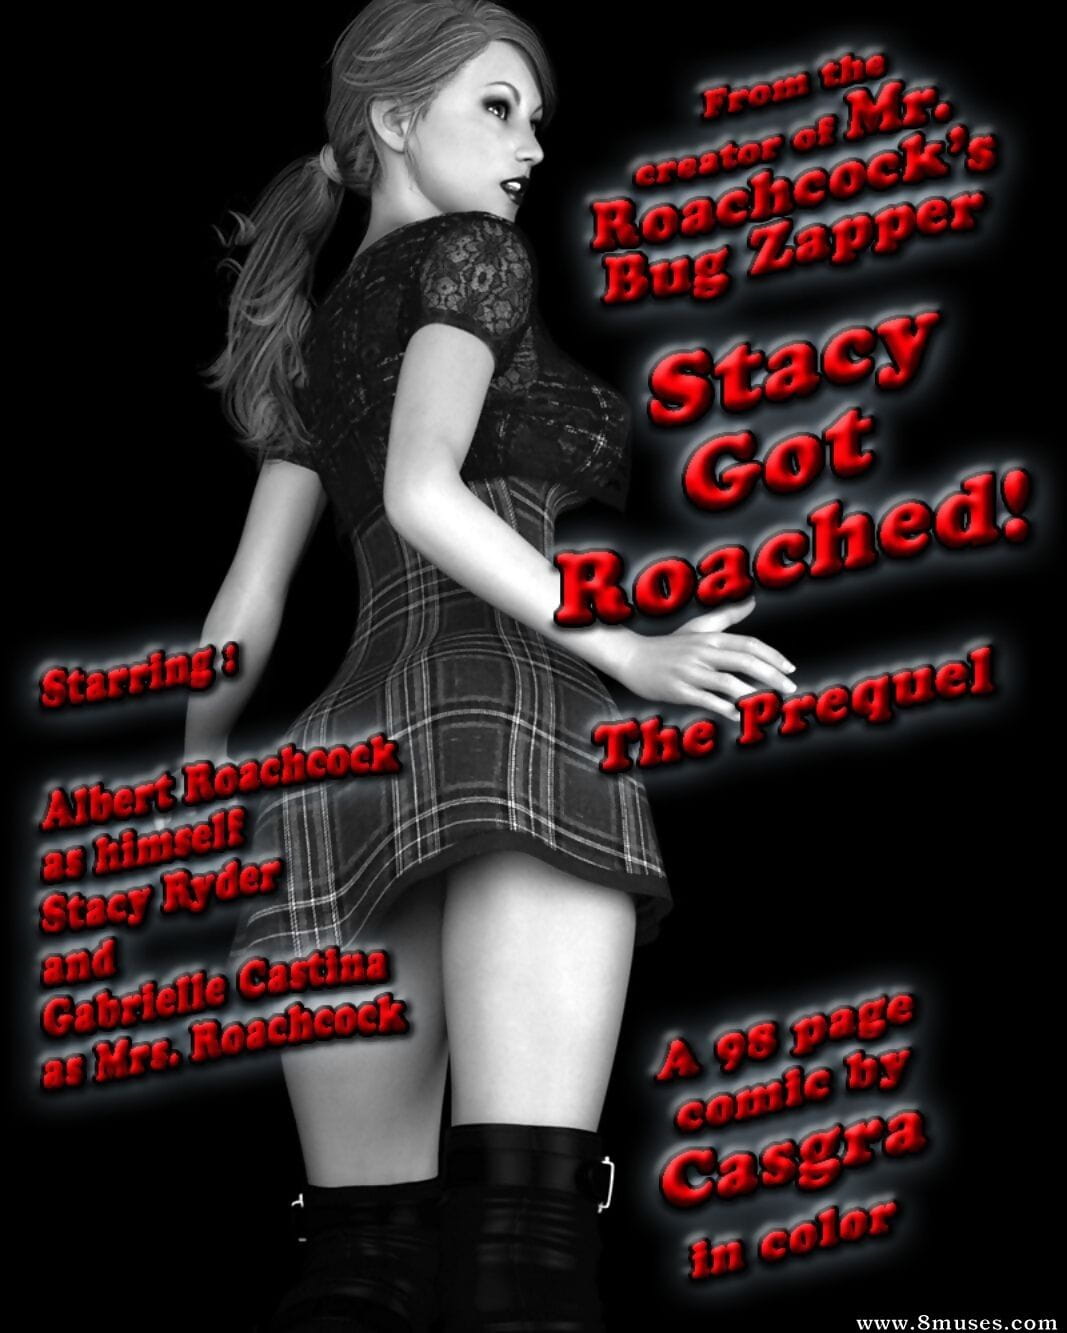 Cagra - Stacy Got Roached page 1